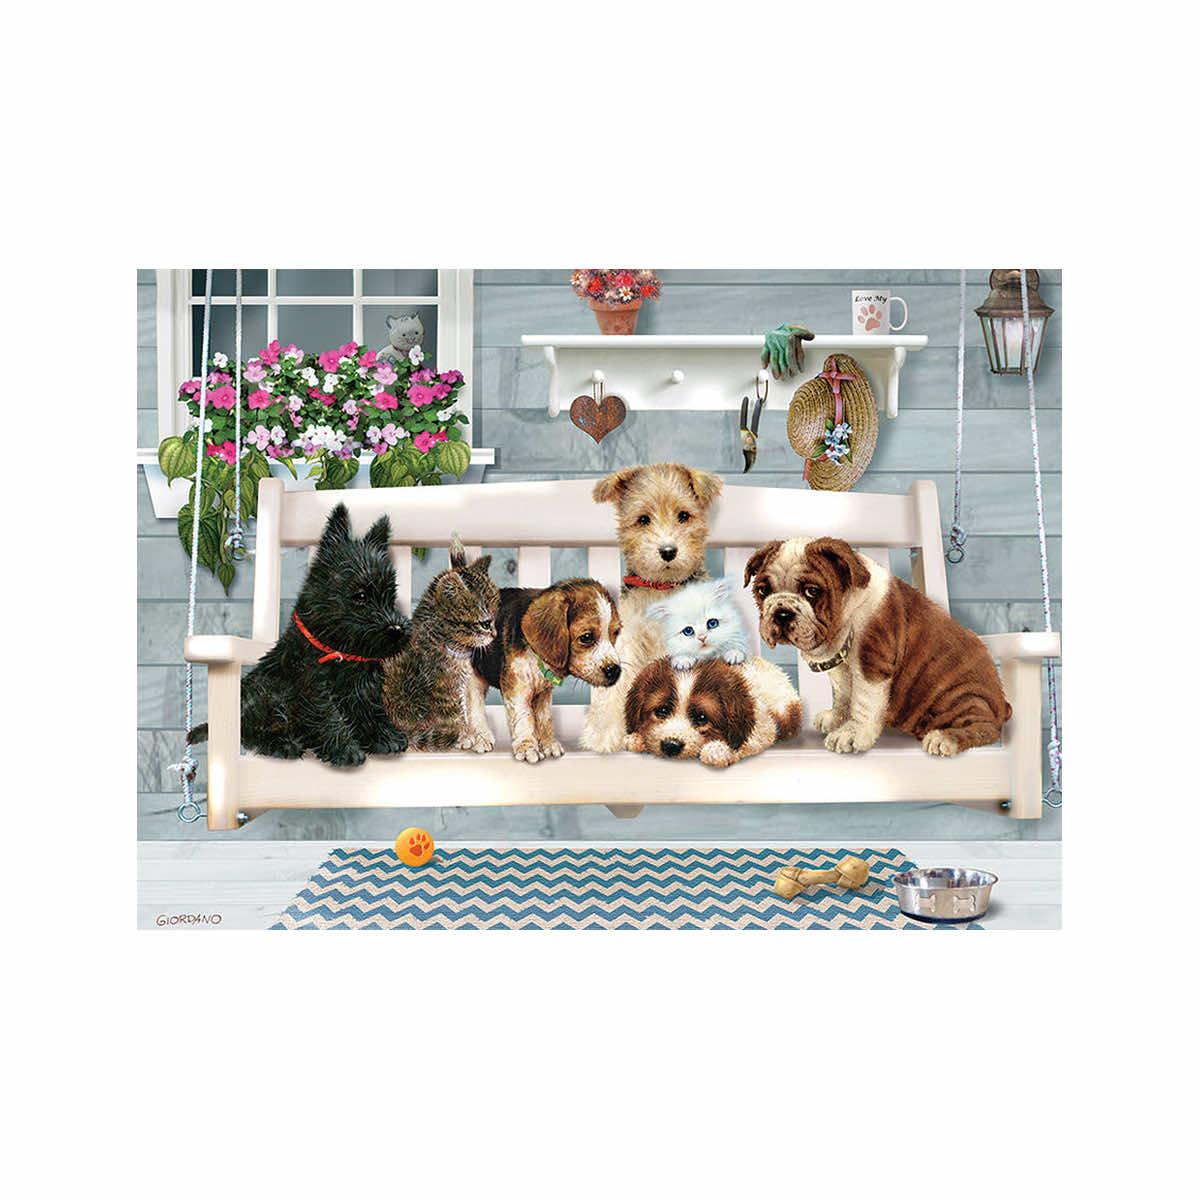  Porch Swing Buddies Tray Puzzle